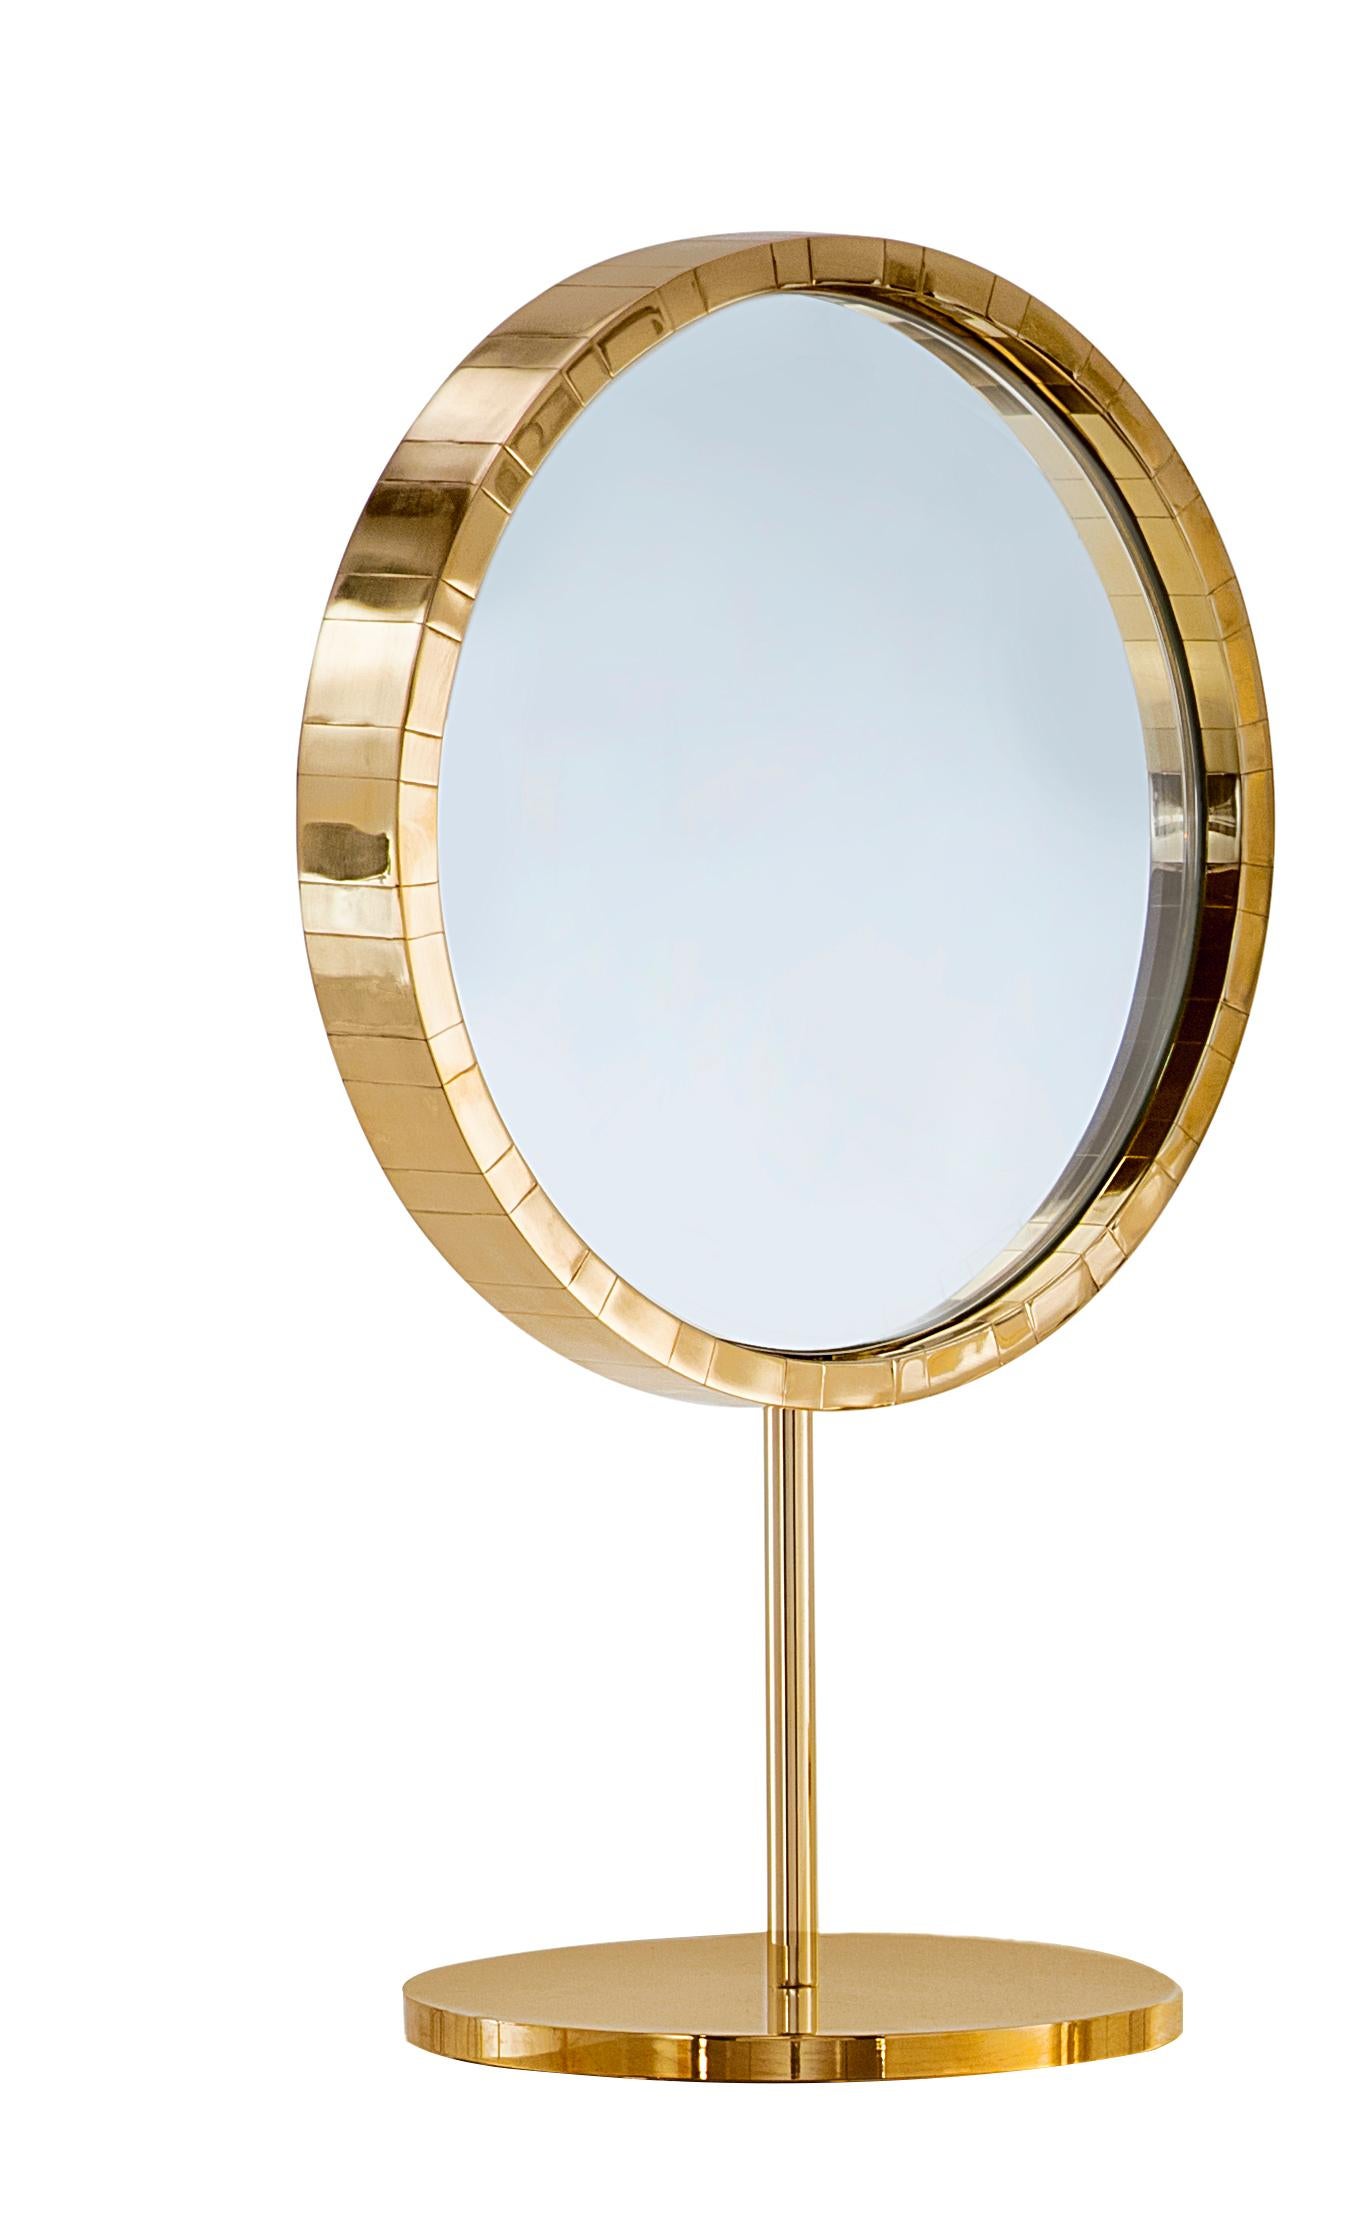 Paris Table Mirror with Brass Inlay by Matteo Cibic is an elegant table mirror in brass.

Matteo Cibic designed the Vanilla Noir collection for Scarlet Splendour in 2014-15. The collection over the years comprises of over fifty beautiful pieces of